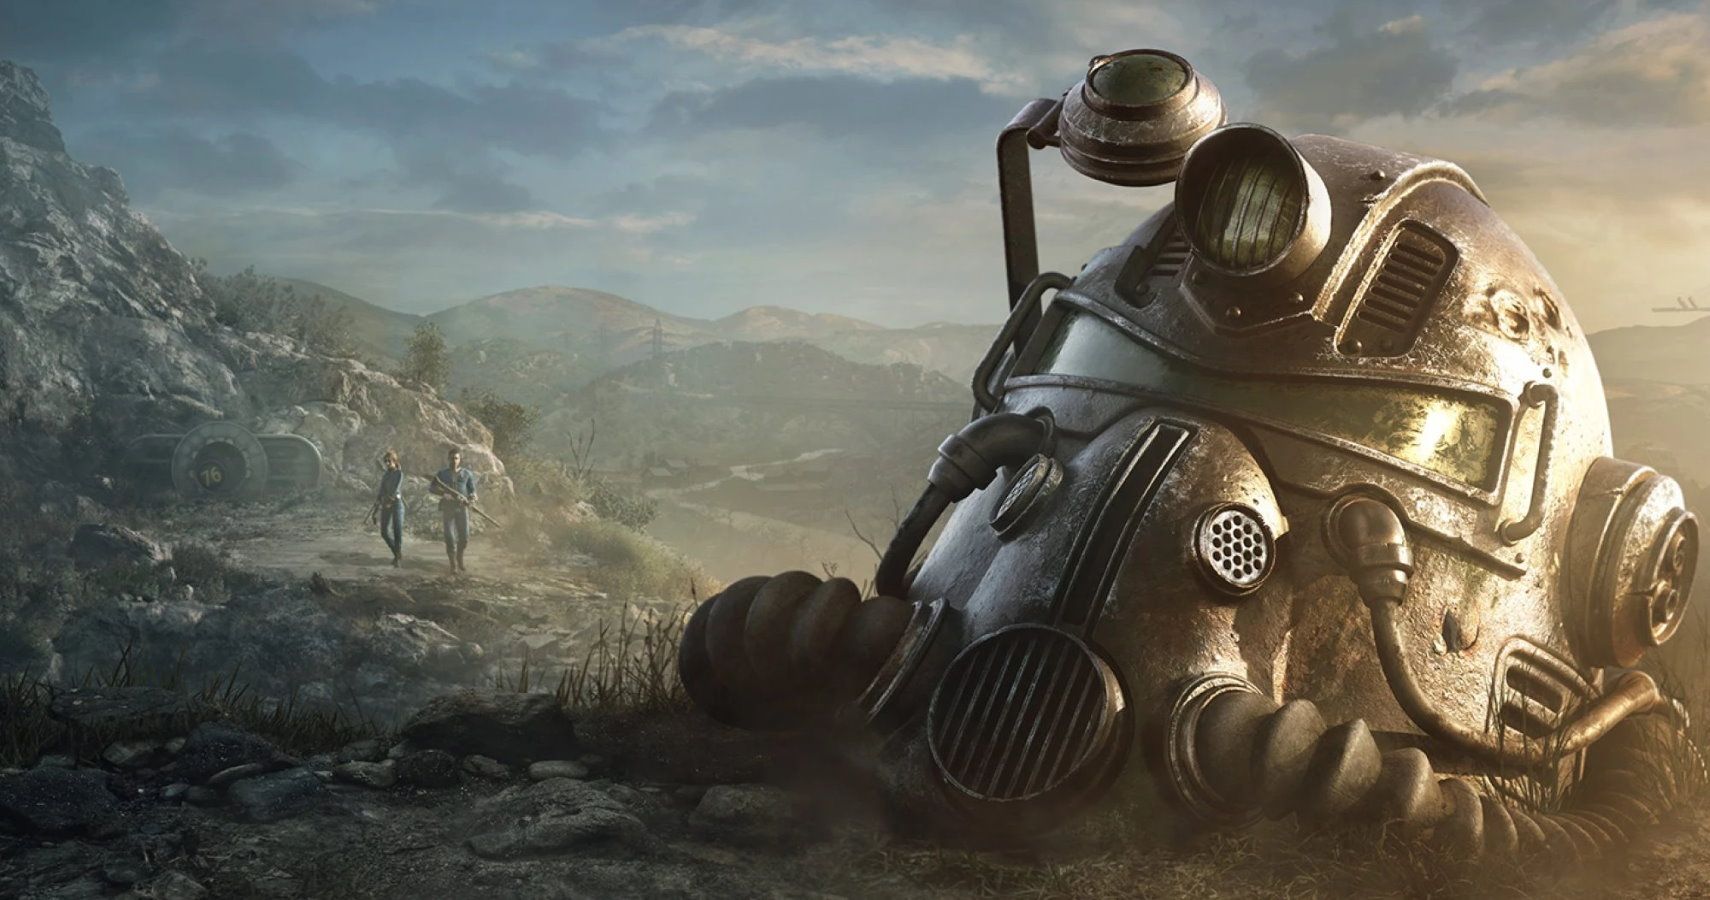 GameStops Fallout Power Armor Helmets Are Being Recalled